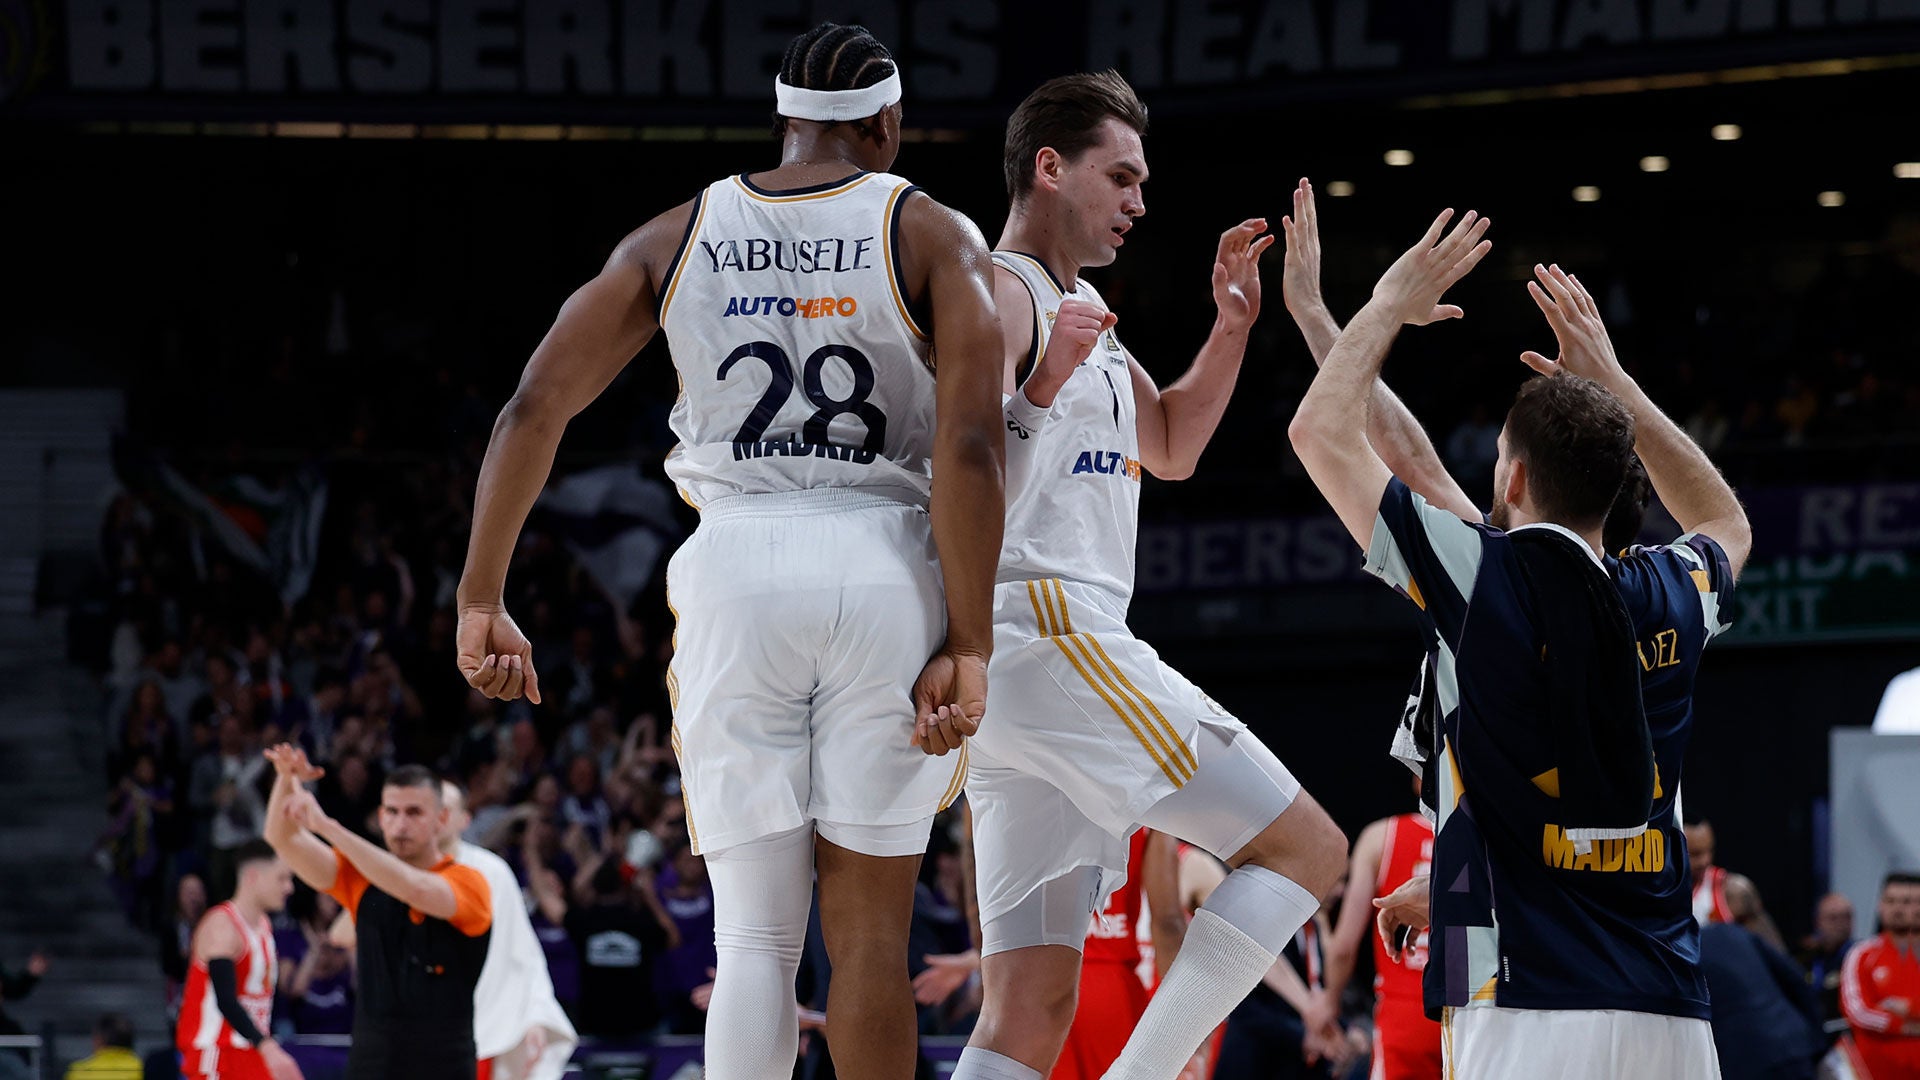 Real Madrid breaks the record for most wins in the Euroleague Regular Season